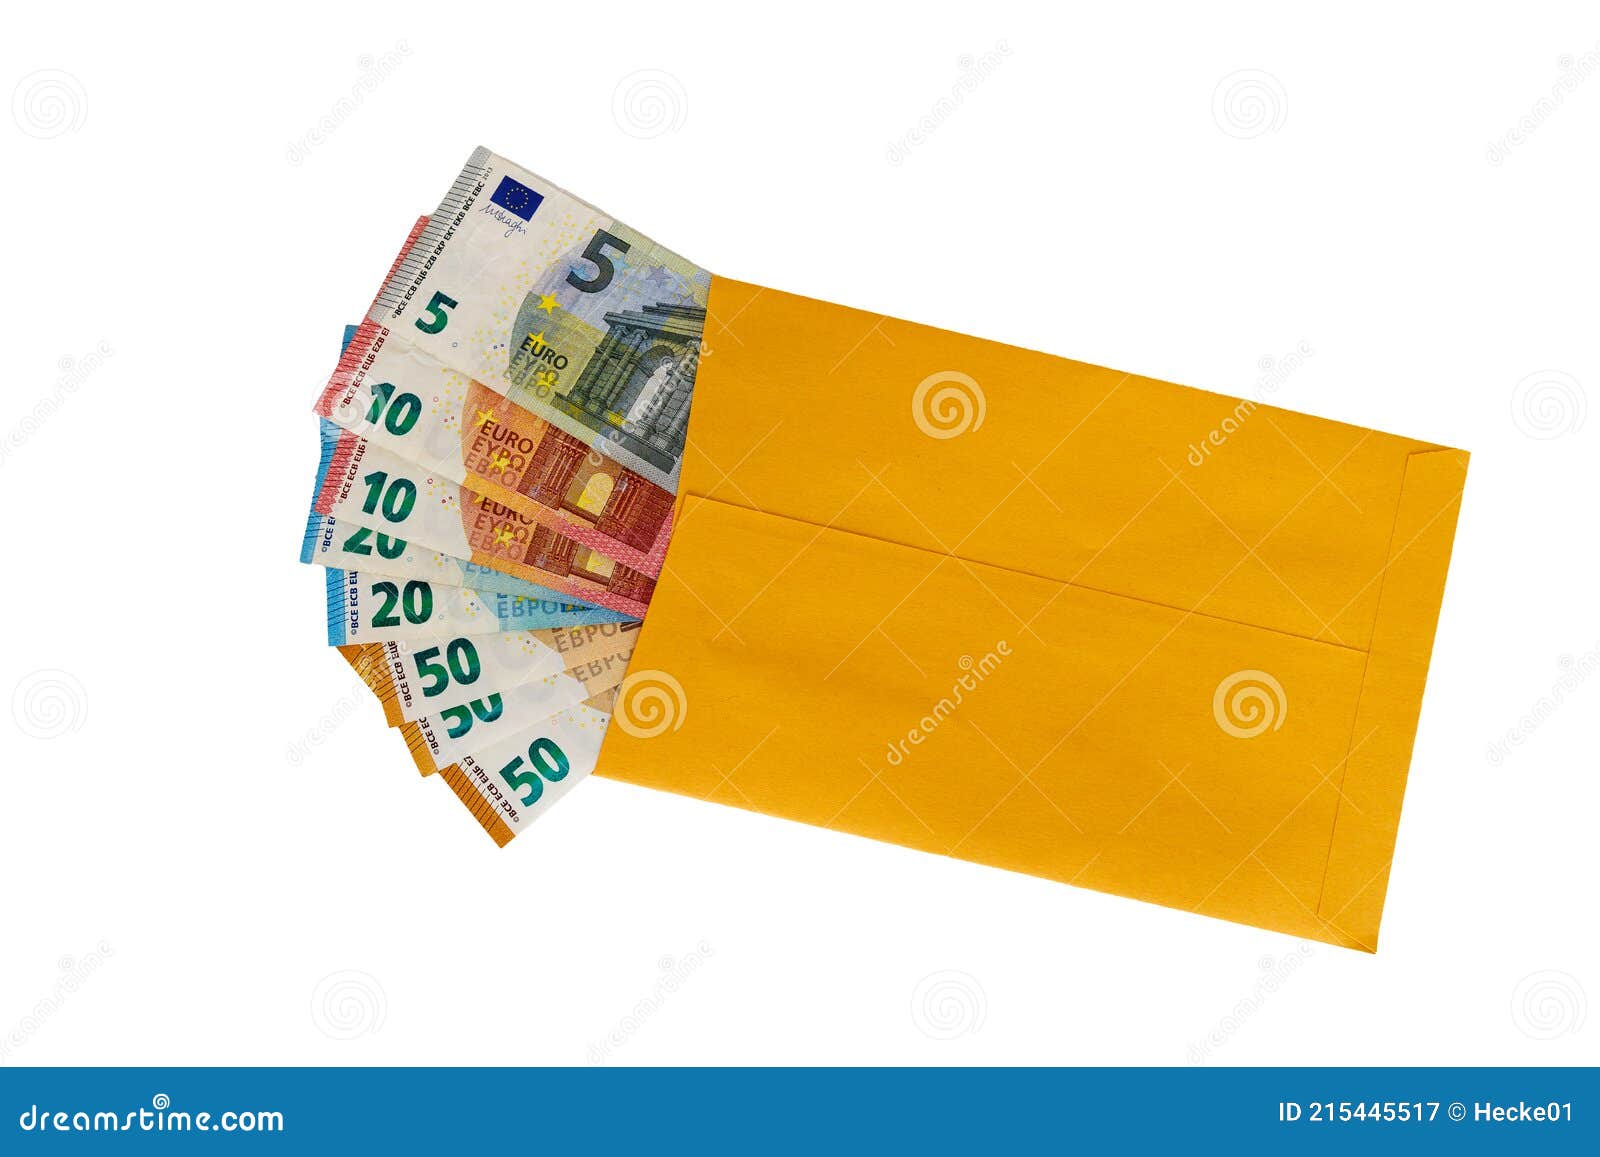 151 Wage Packet Photos Free Royalty Free Stock Photos From Dreamstime